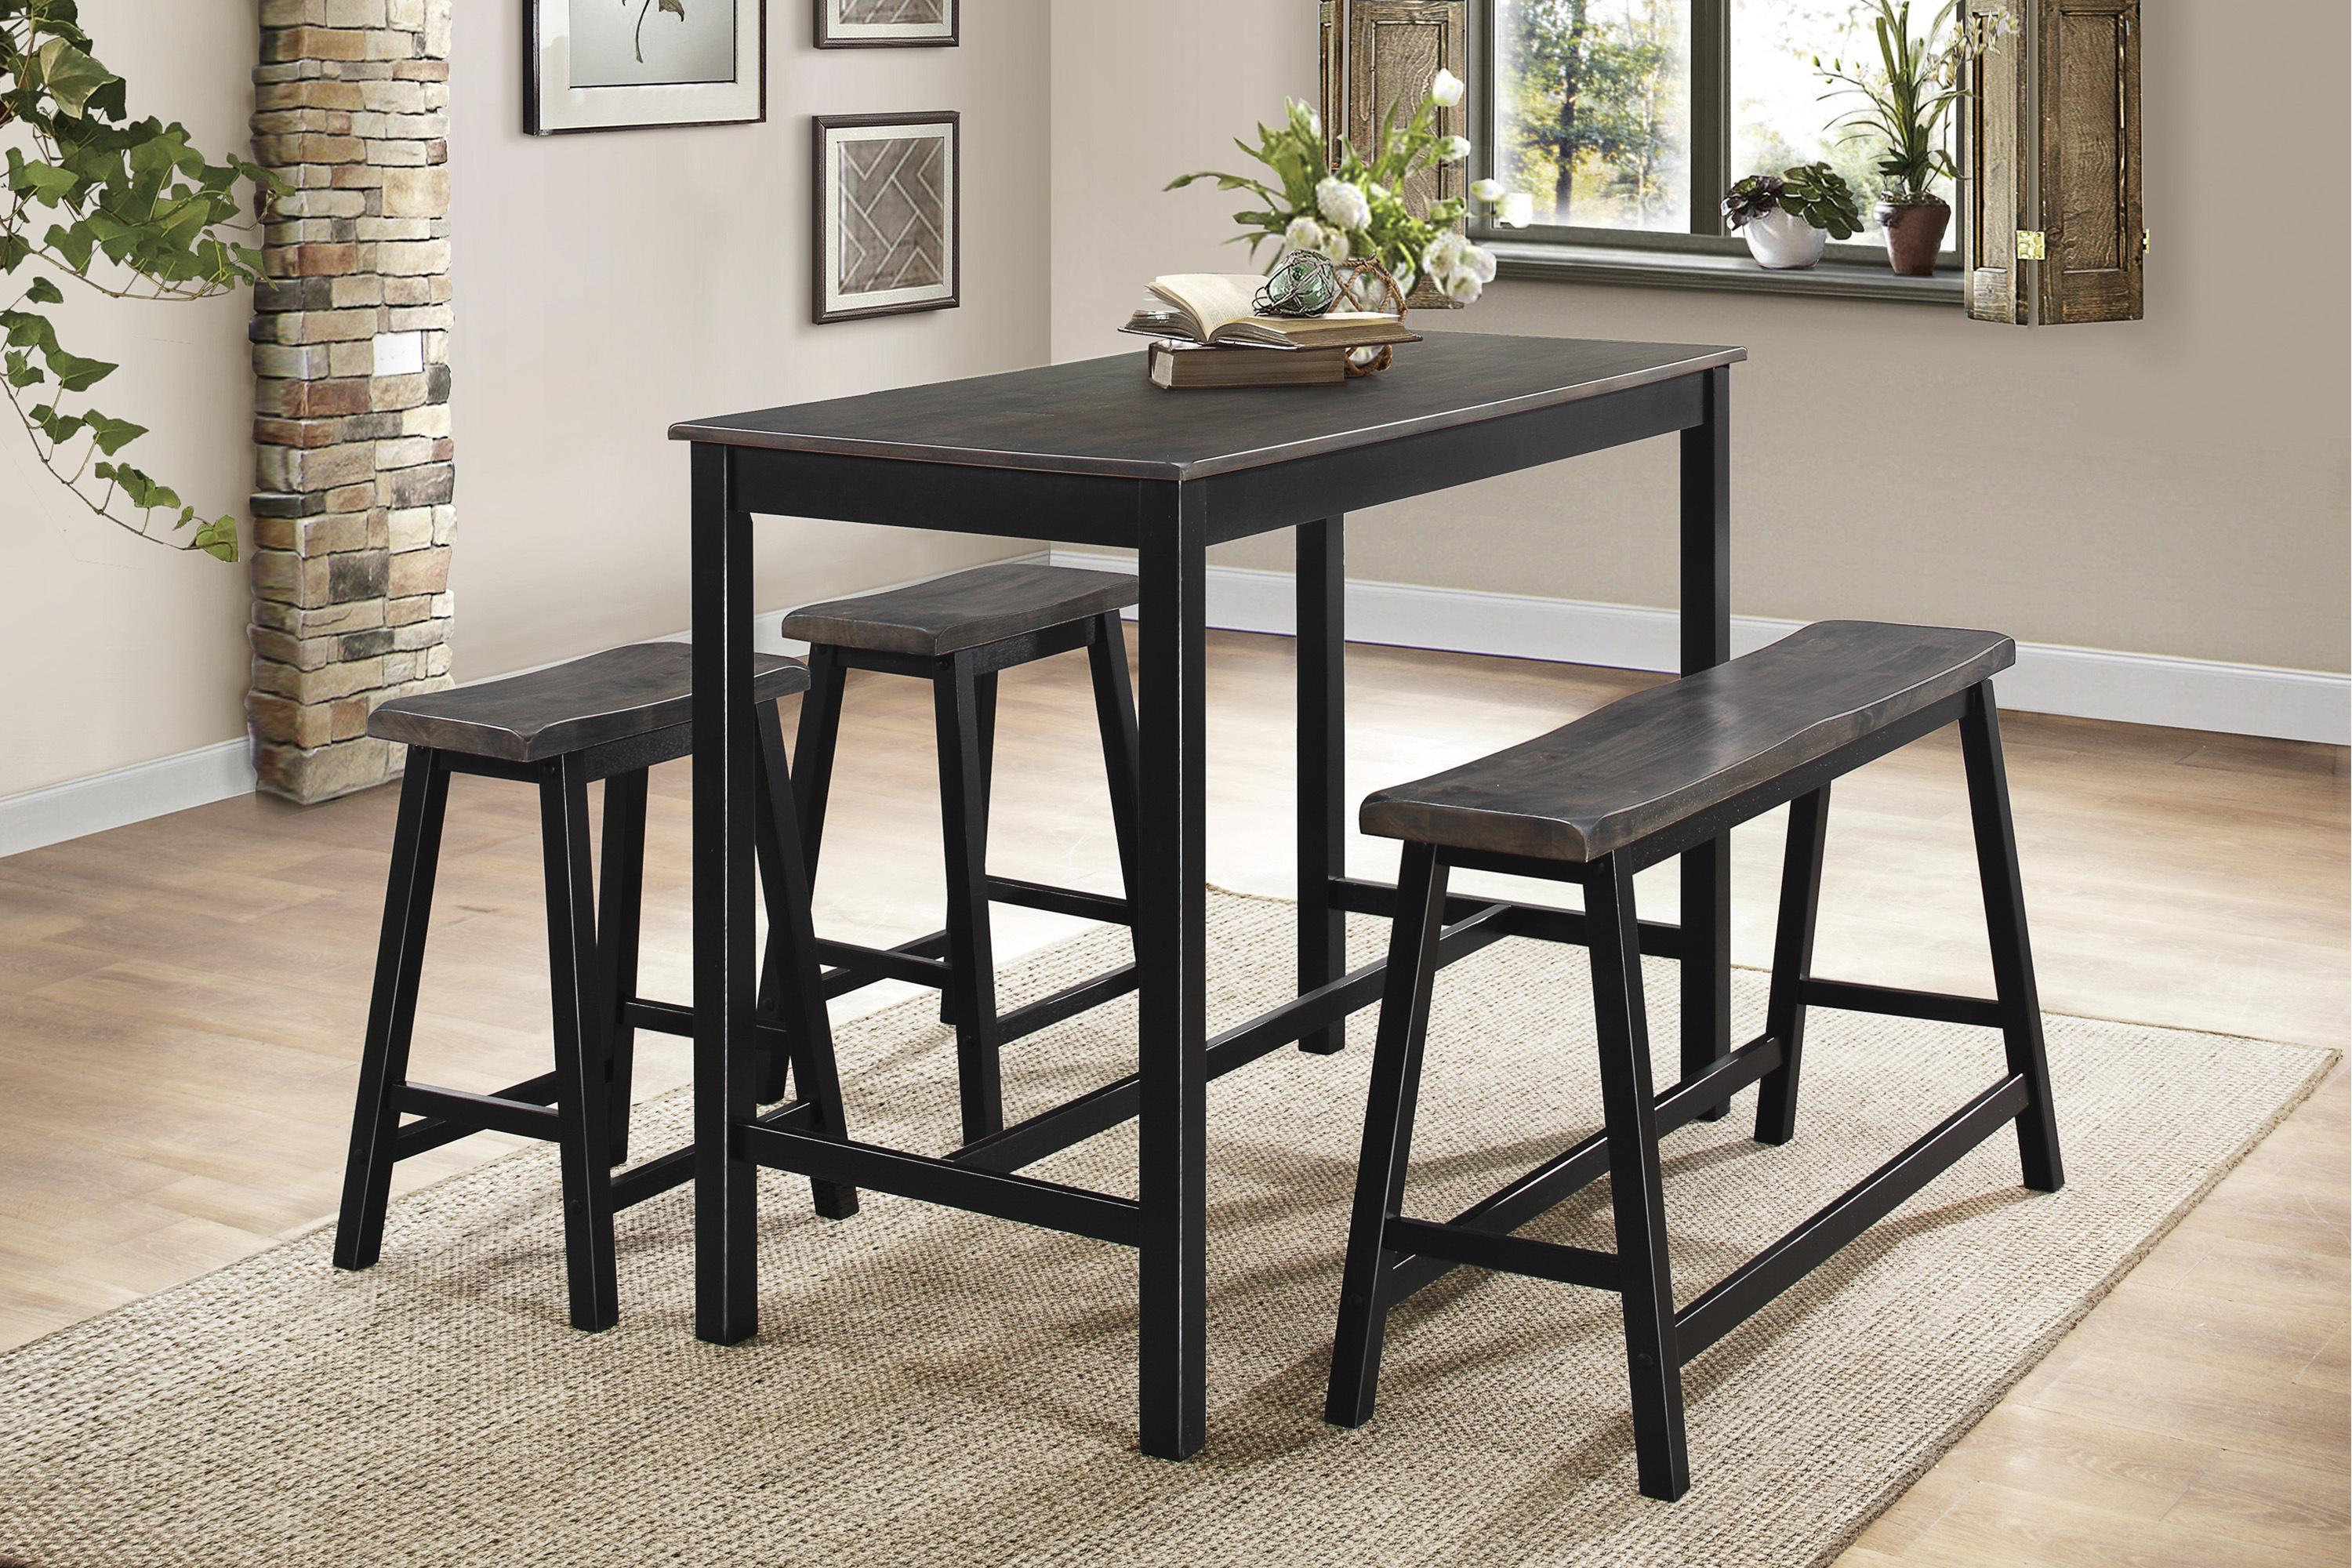 

    
Transitional Black & Gray Solid Rubberwood Dining Room Set 4pcs Homelegance 5578-32-4PC Visby
